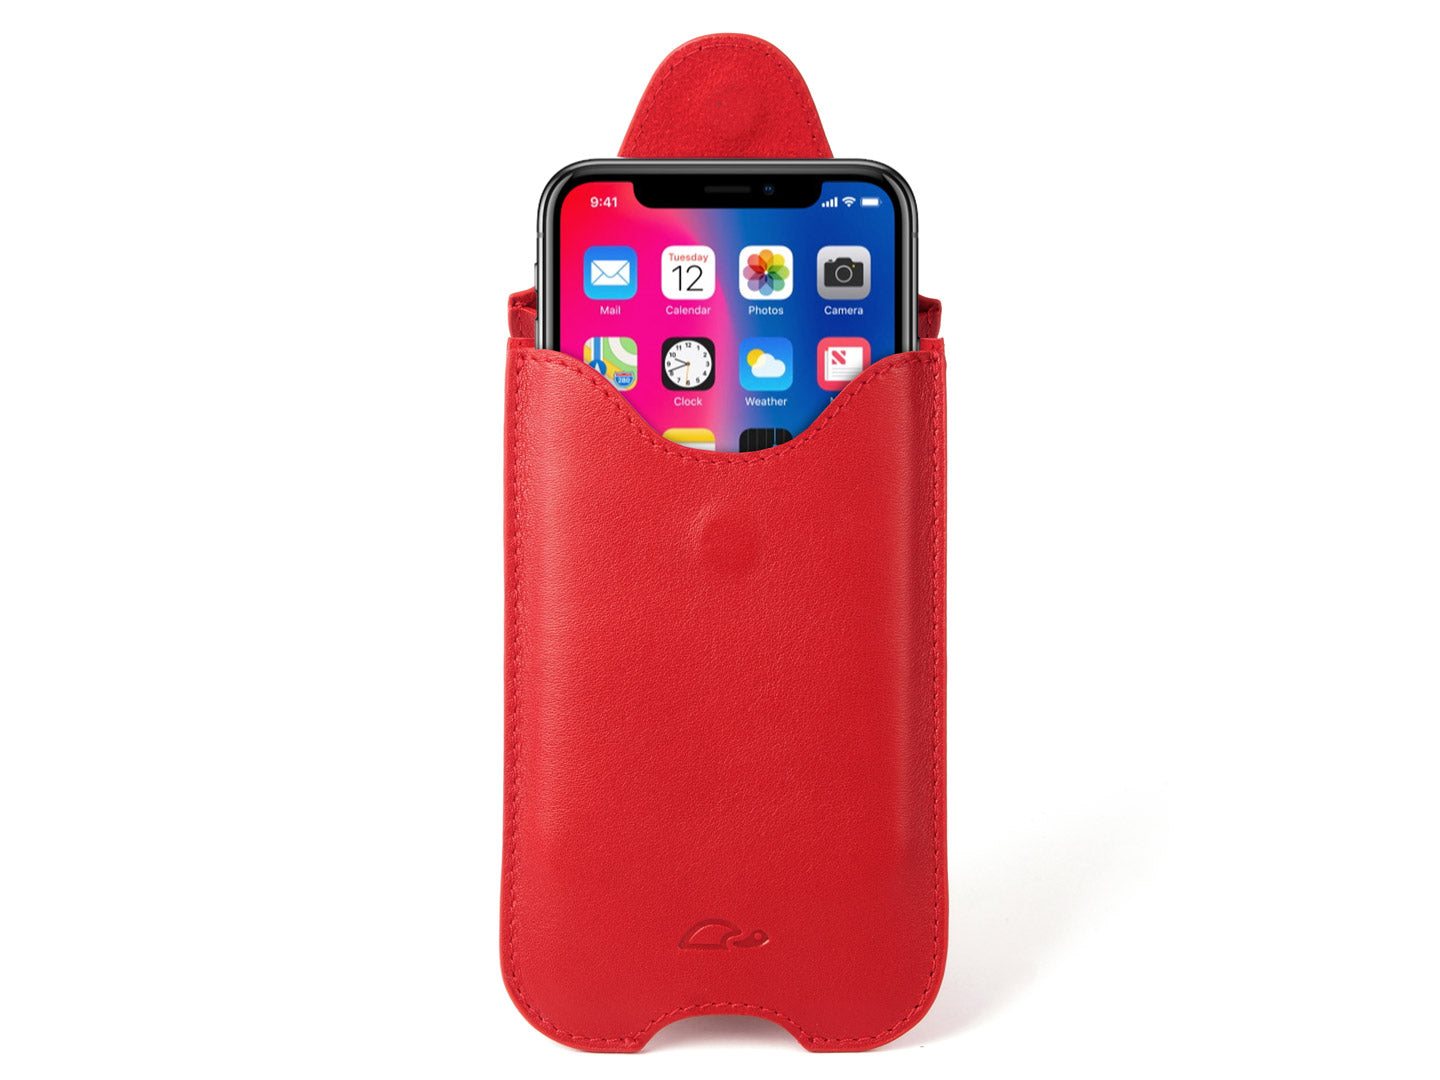 Leather pouch iPhone X / Xs / 11 Pro - Red Leather Cover - Sleeve Case - open - Carapaz